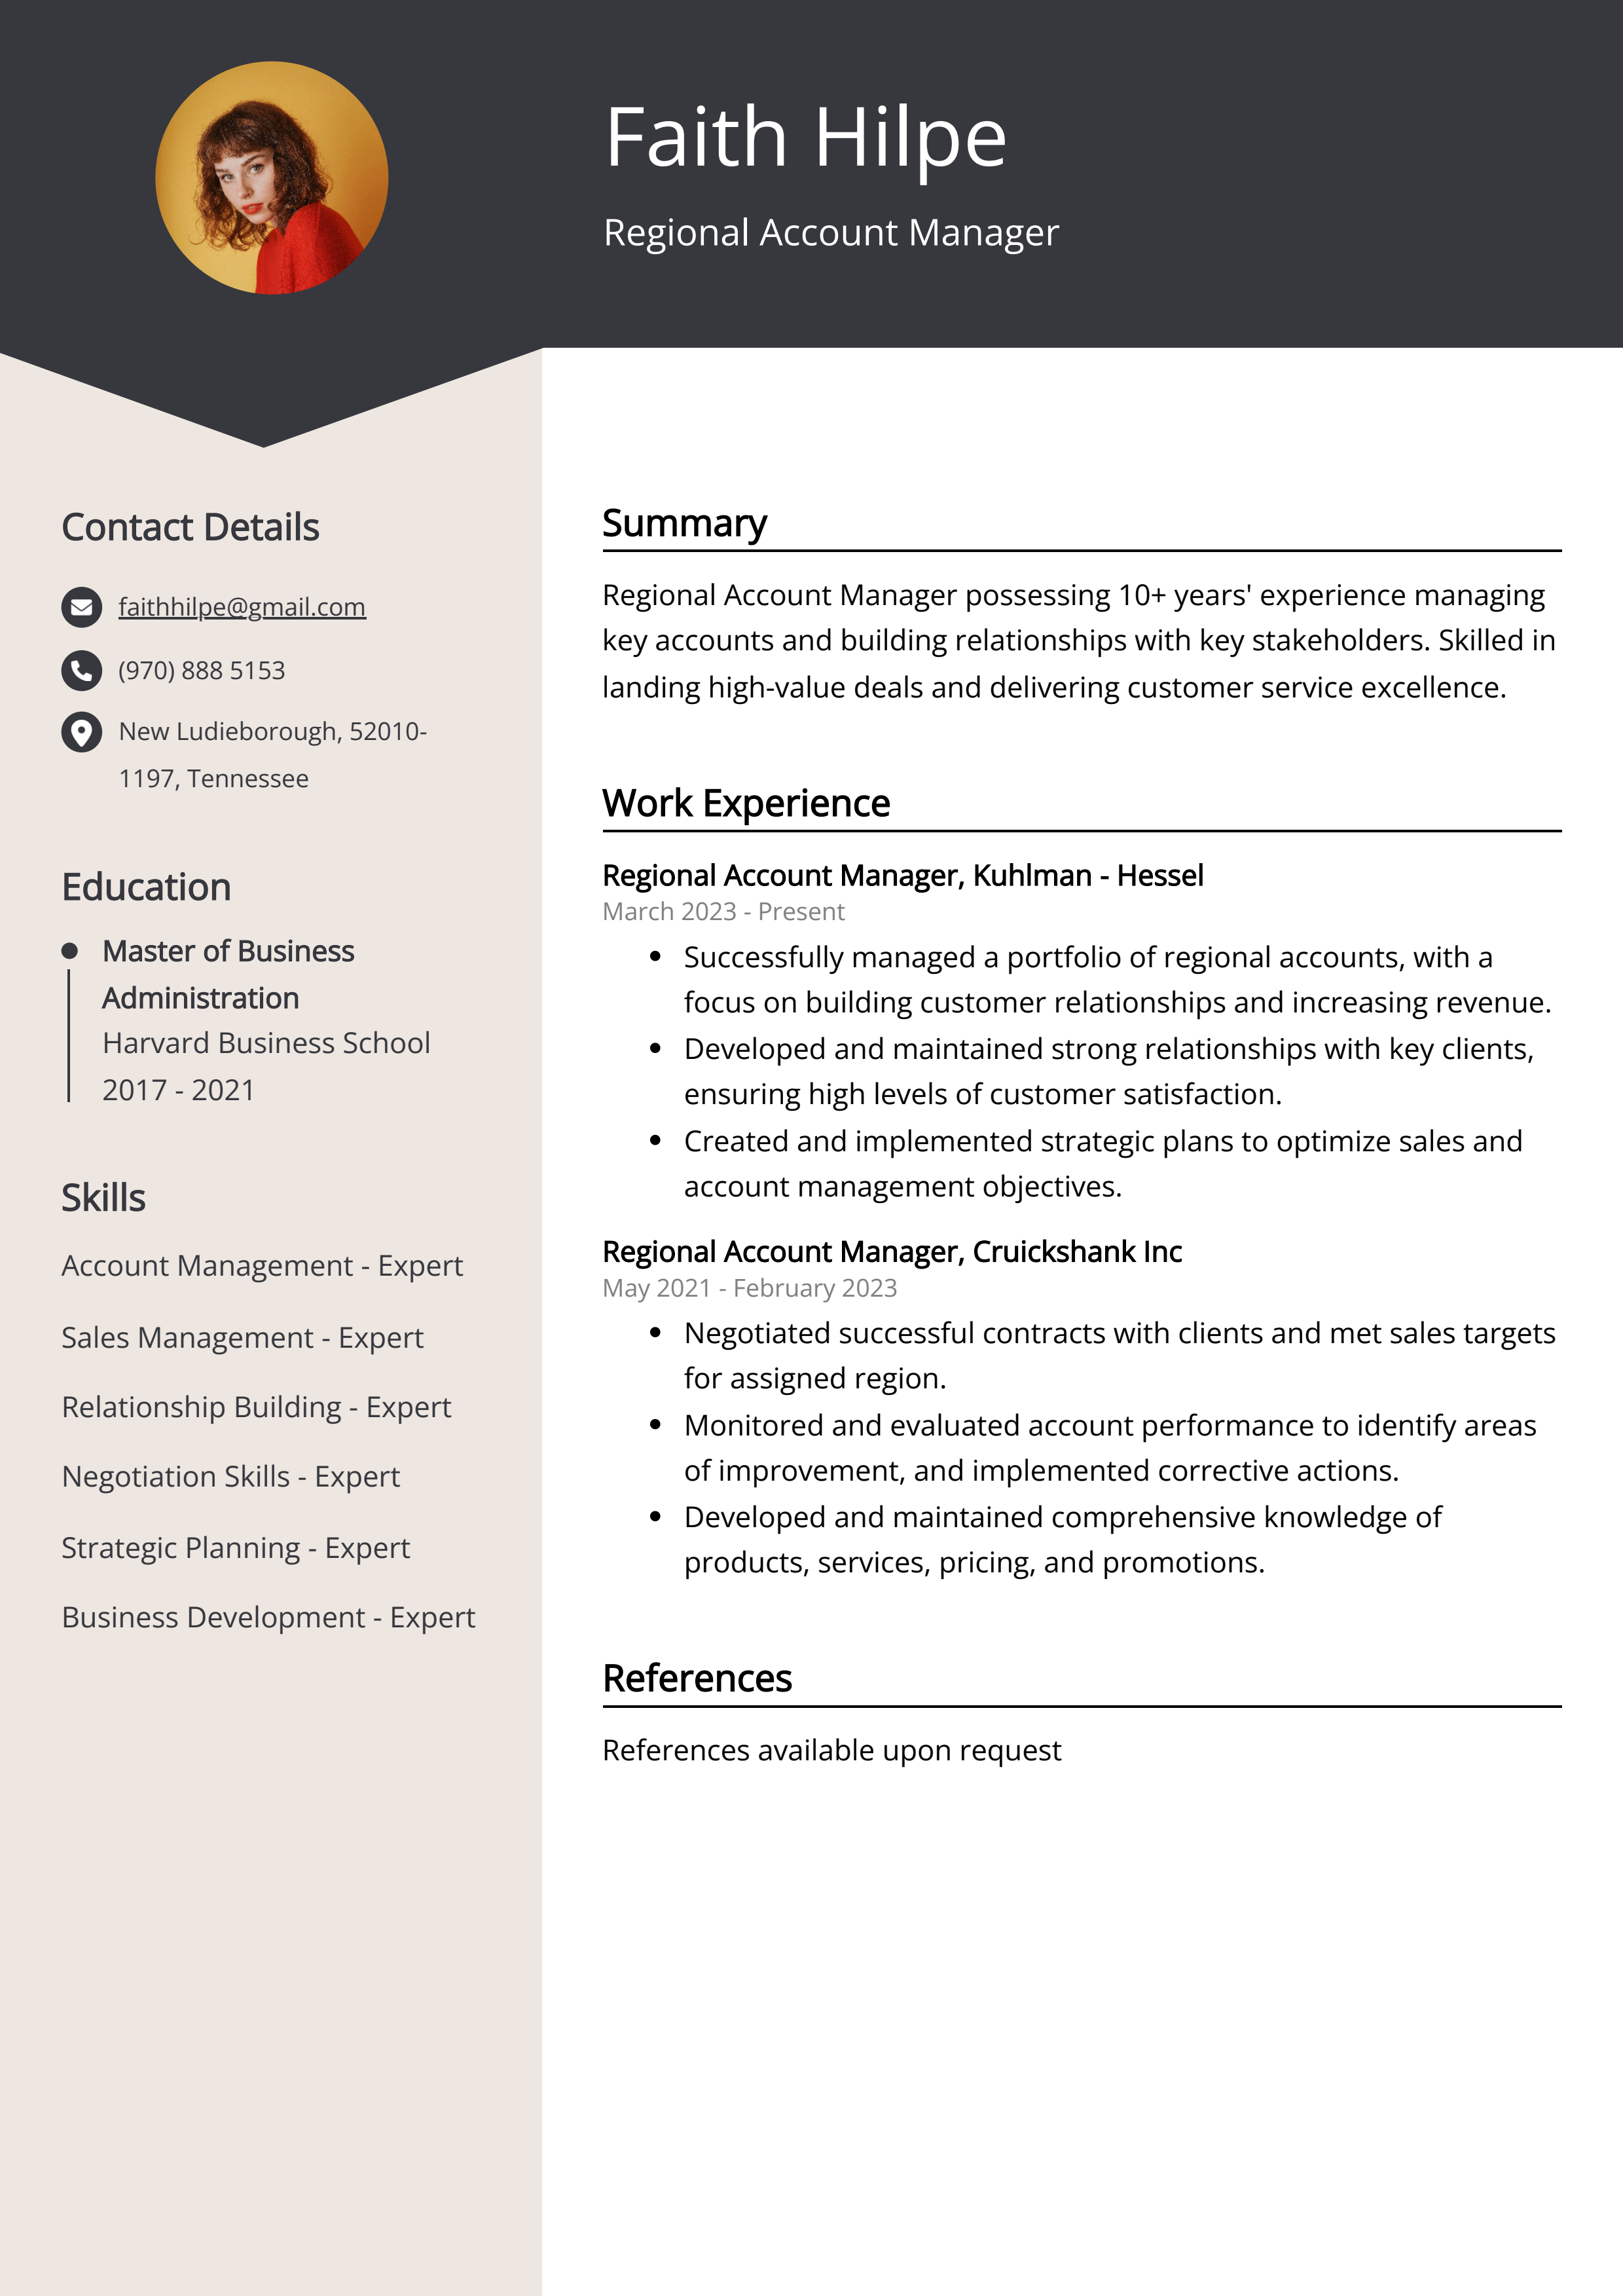 Regional Account Manager CV Example